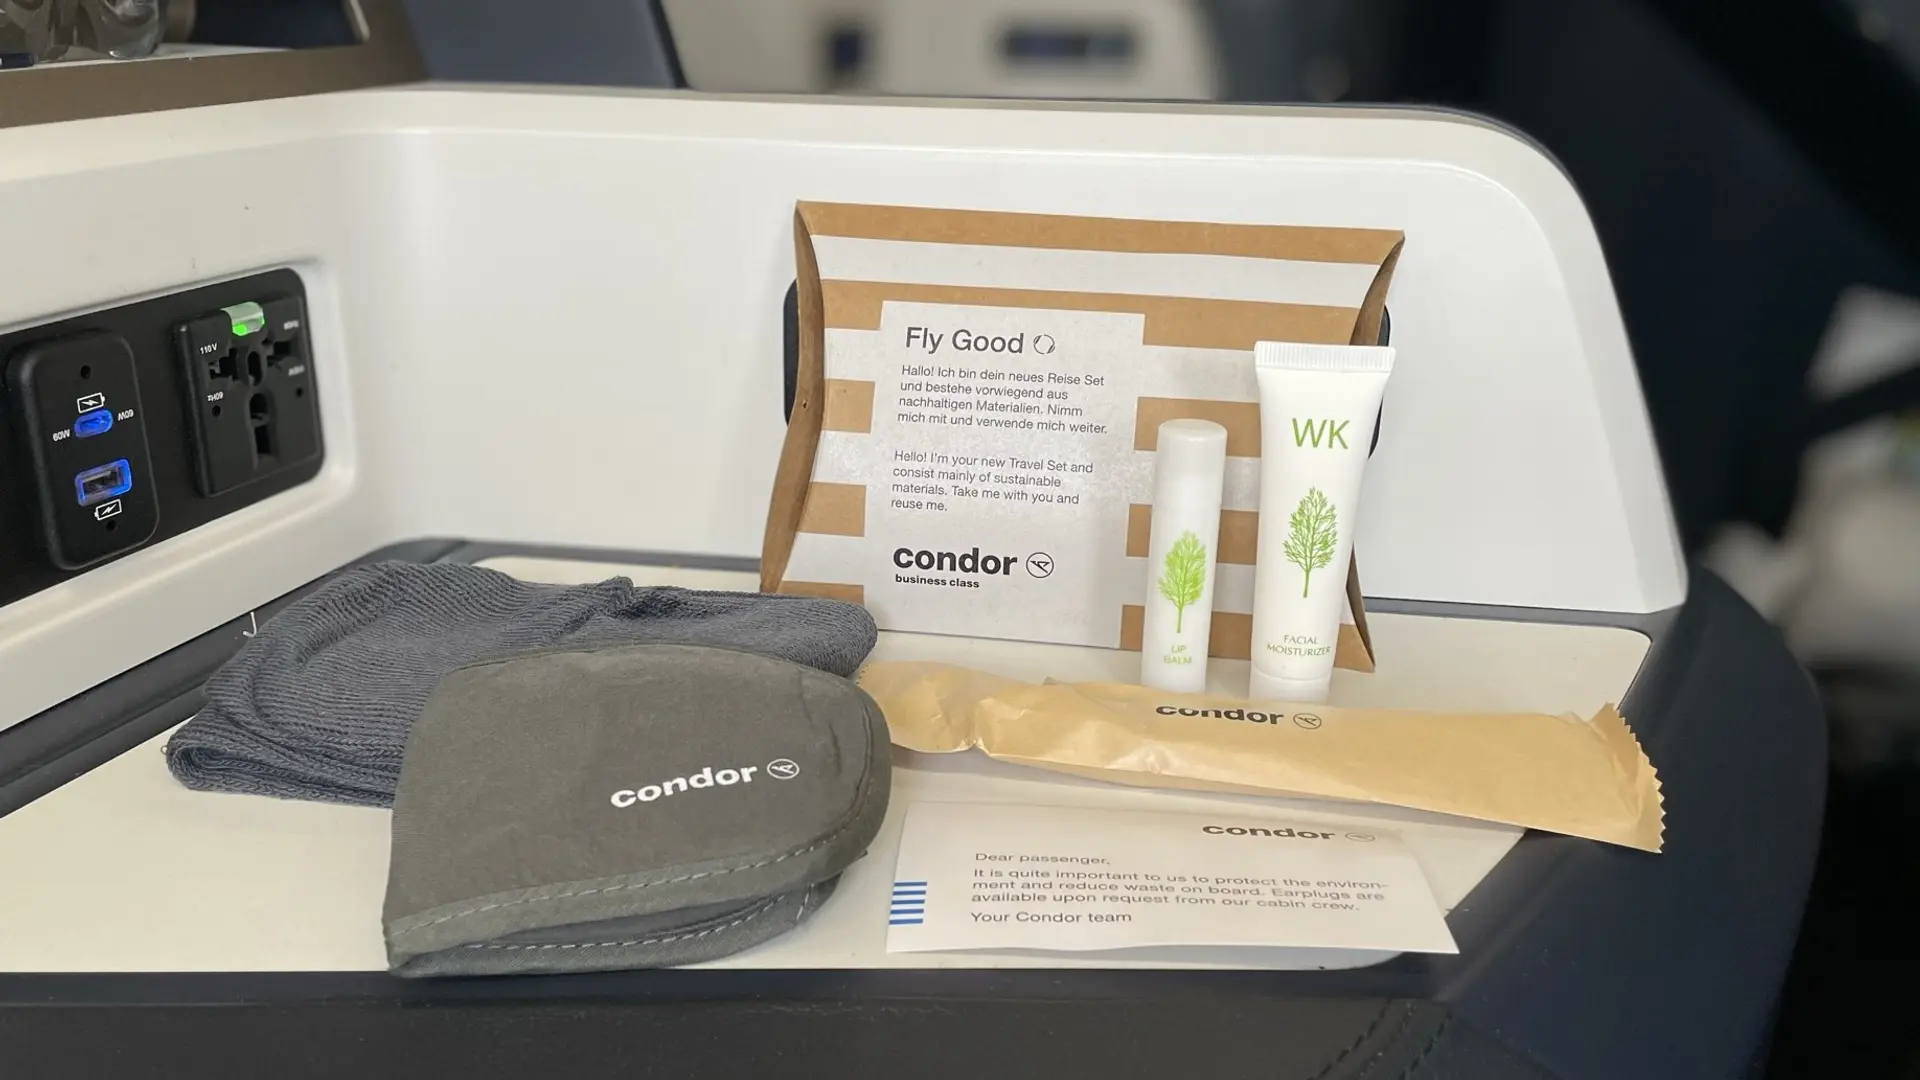 Airline review Amenities & Facilities - Condor - 2